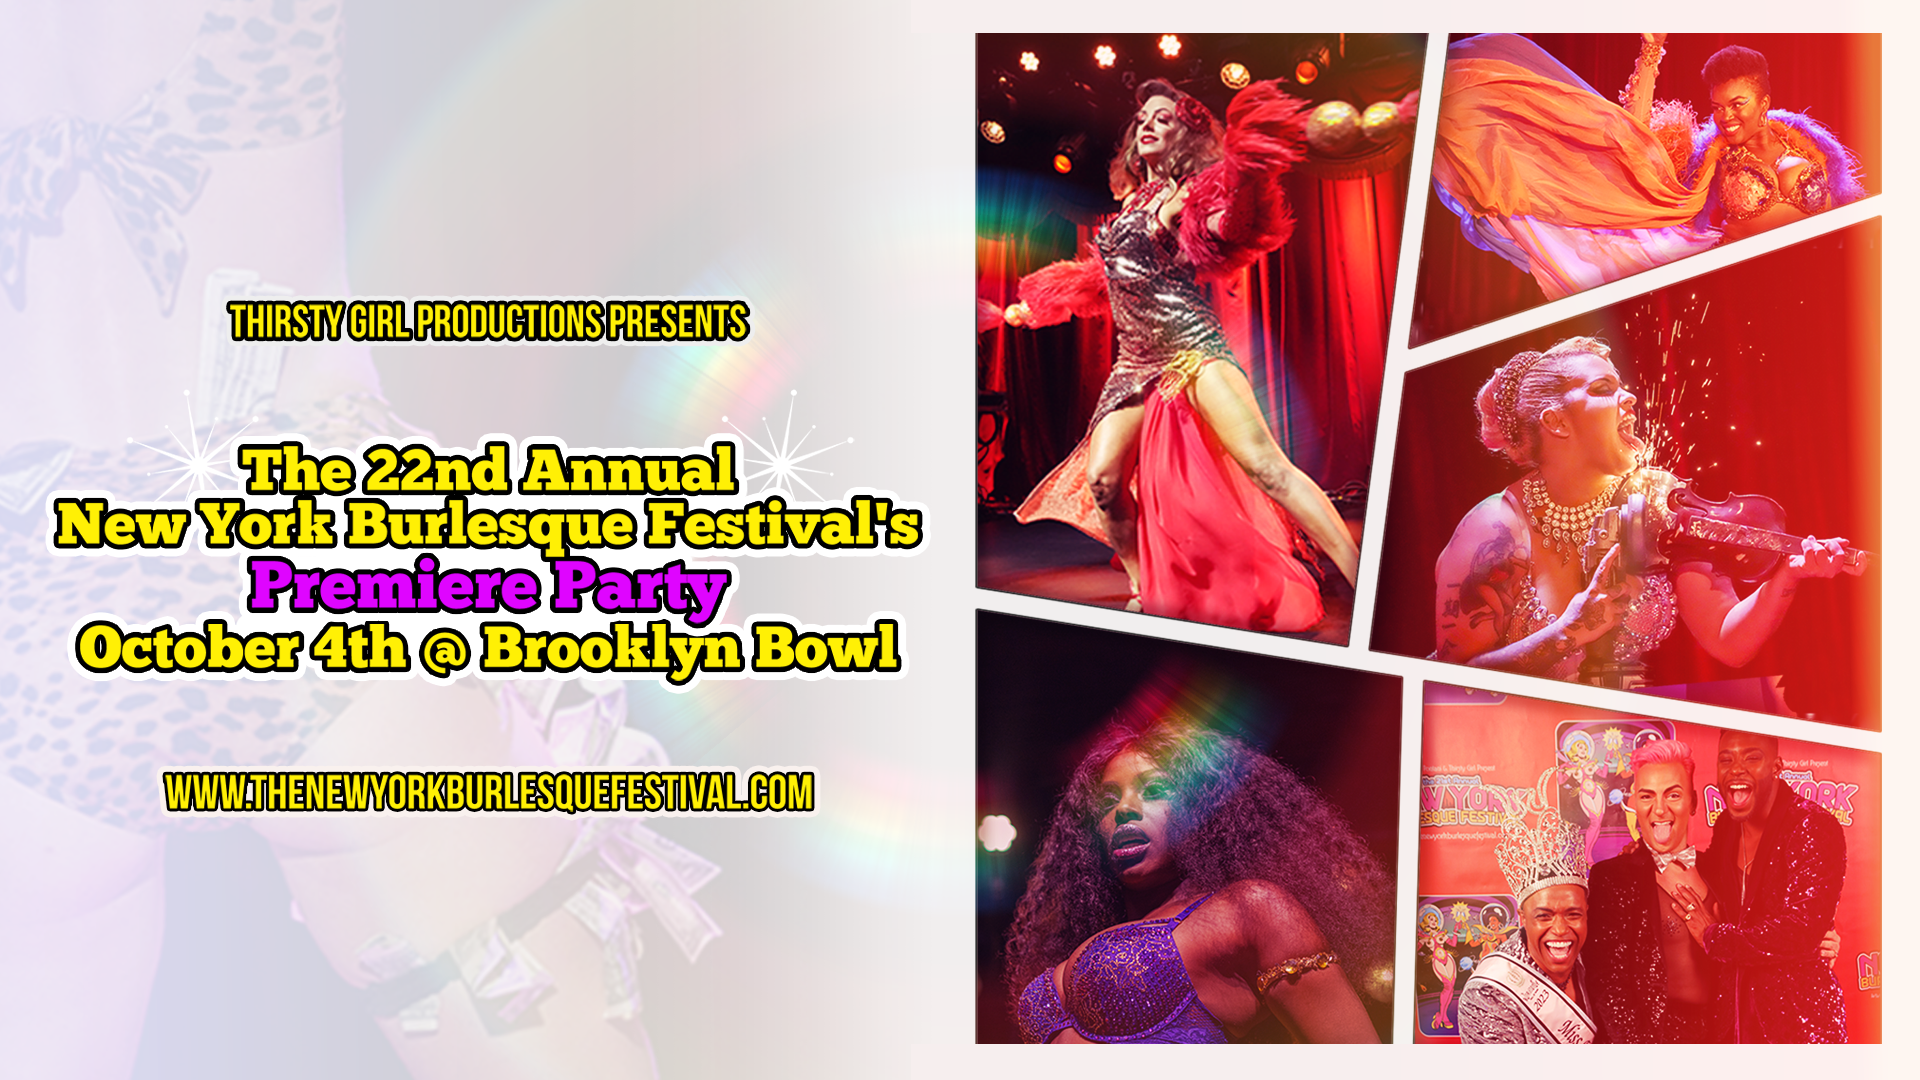 The 22nd Annual New York Burlesque Festival's Premiere Party!